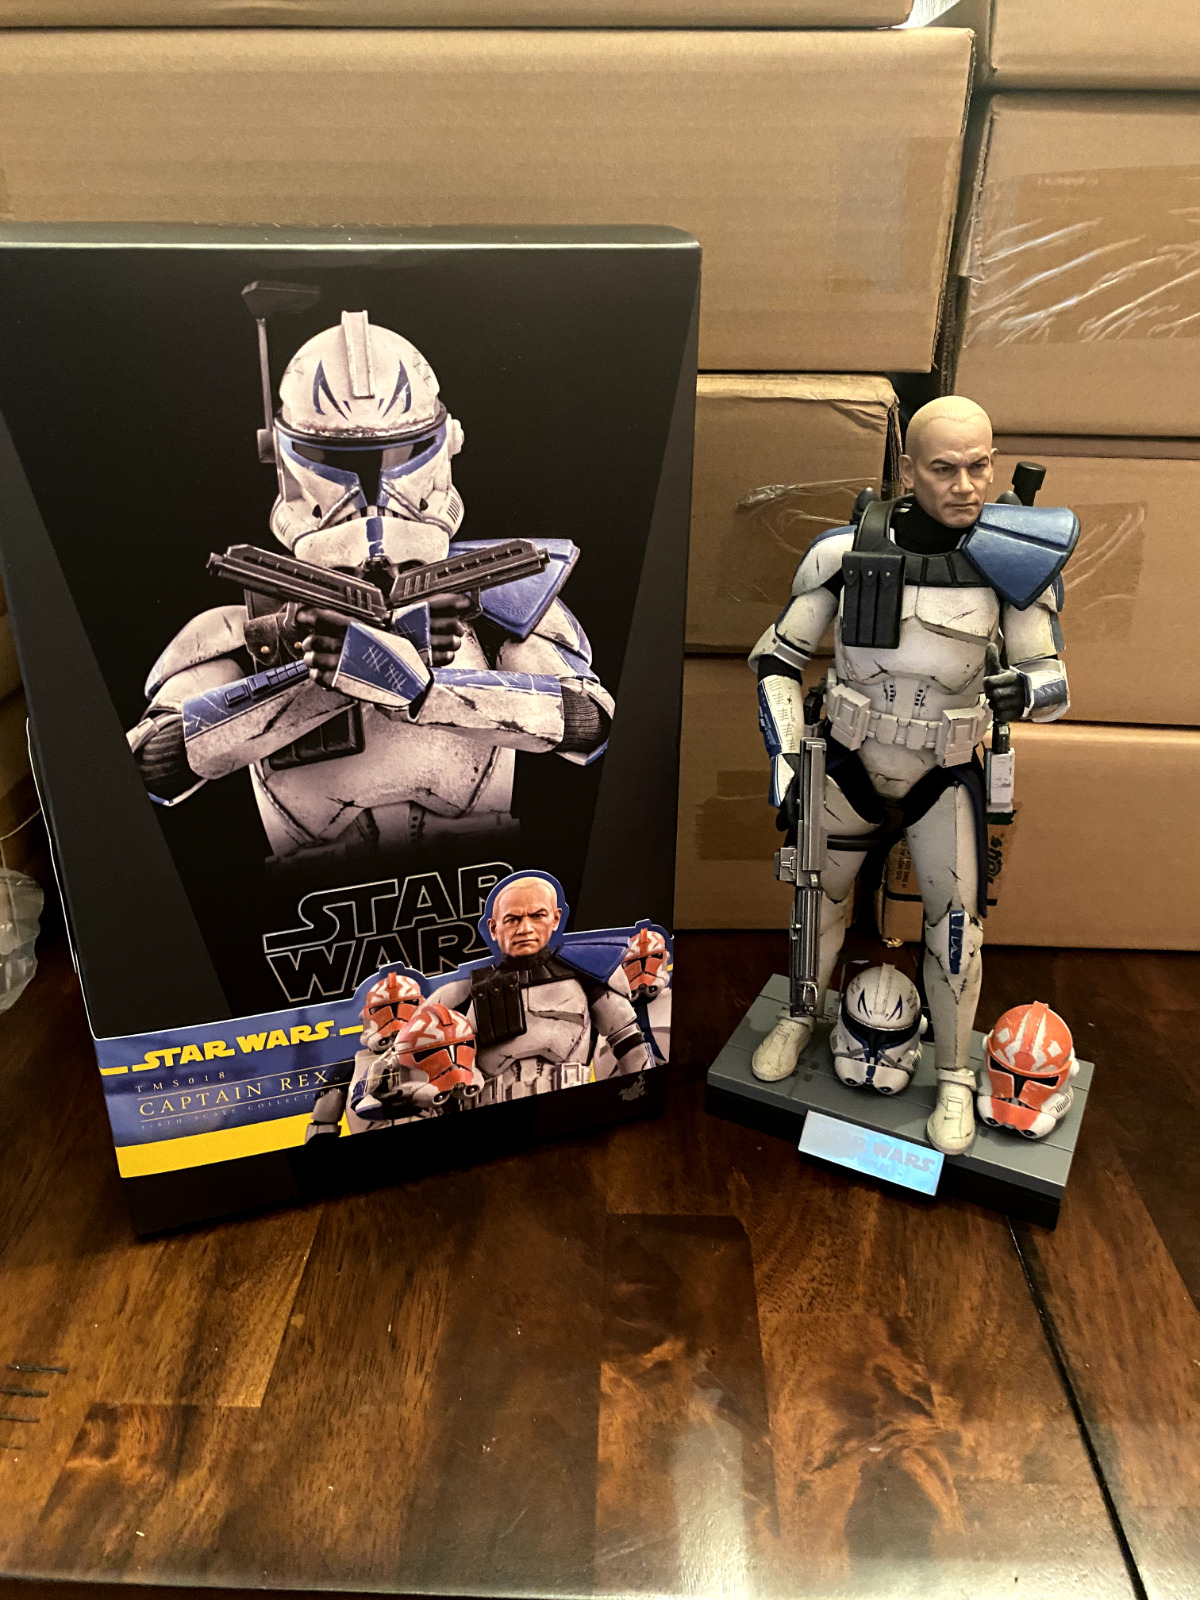 HOT TOYS STAR WARS 1/6TH TMS018 CAPTAIN REX -MINT CONDITION